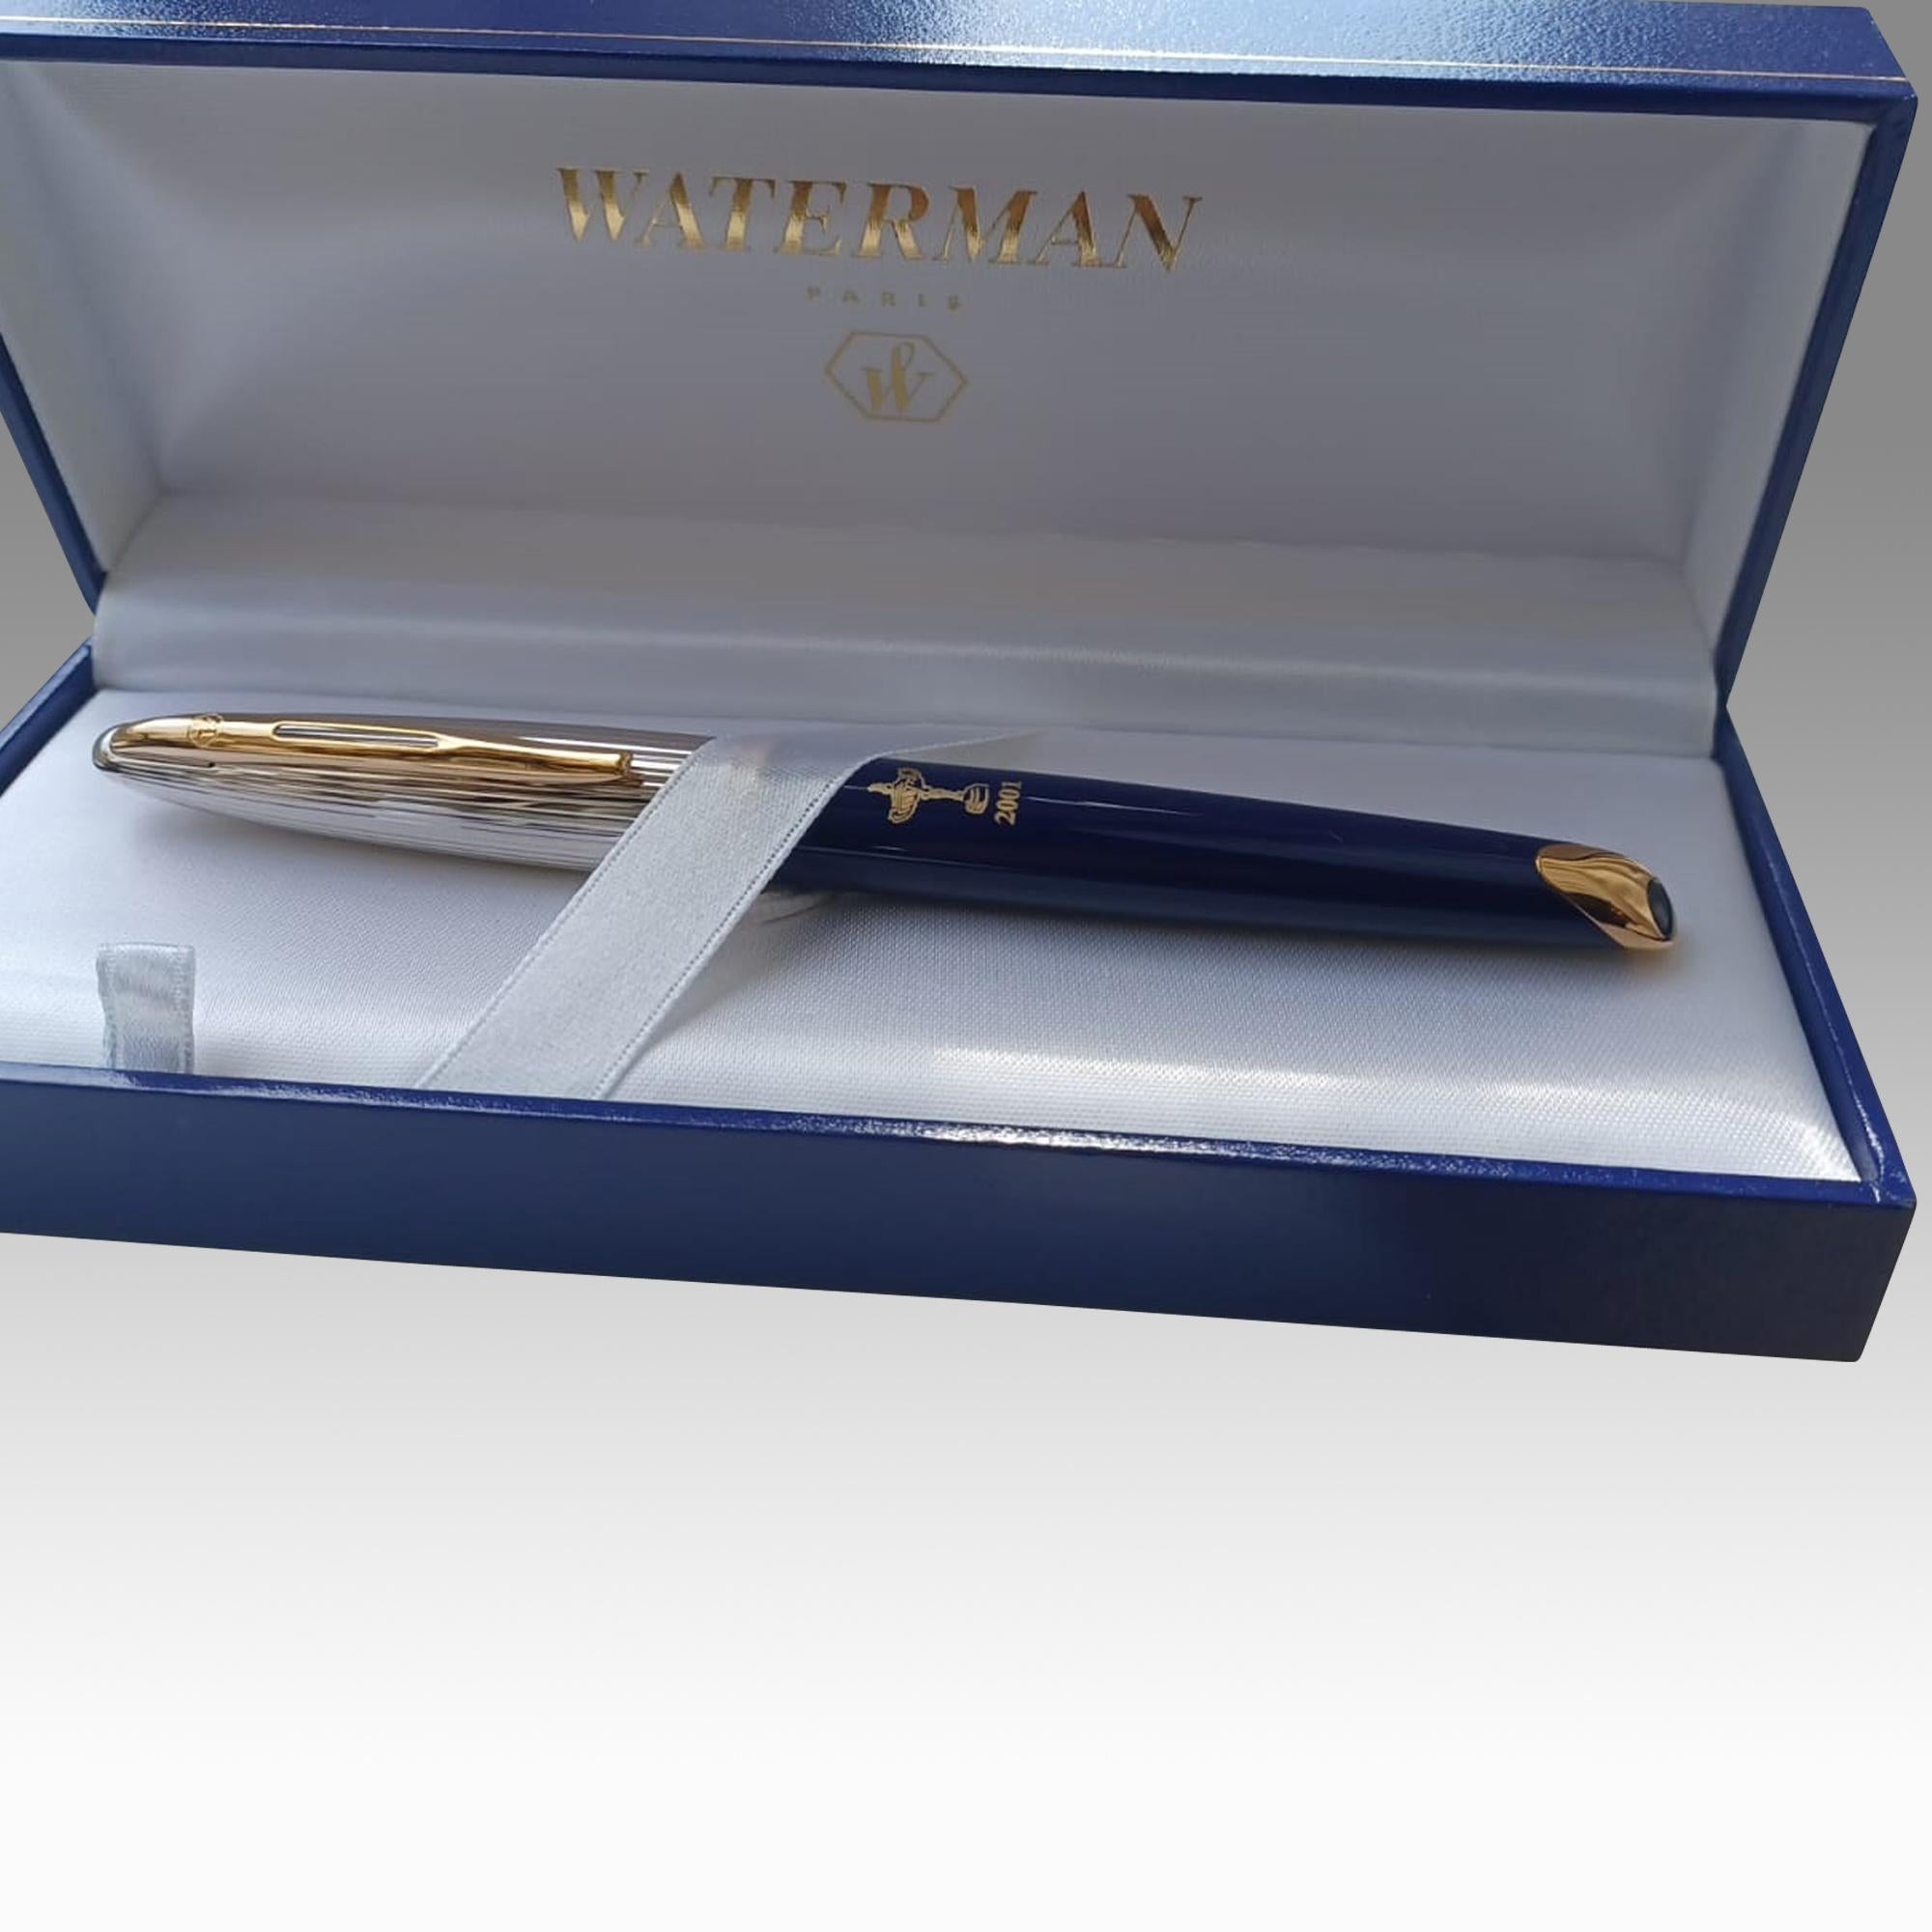 Rare 2001 Postponed Ryder Cup Waterman Ink Fountain Pen with 18K Gold Nib For Sale 3